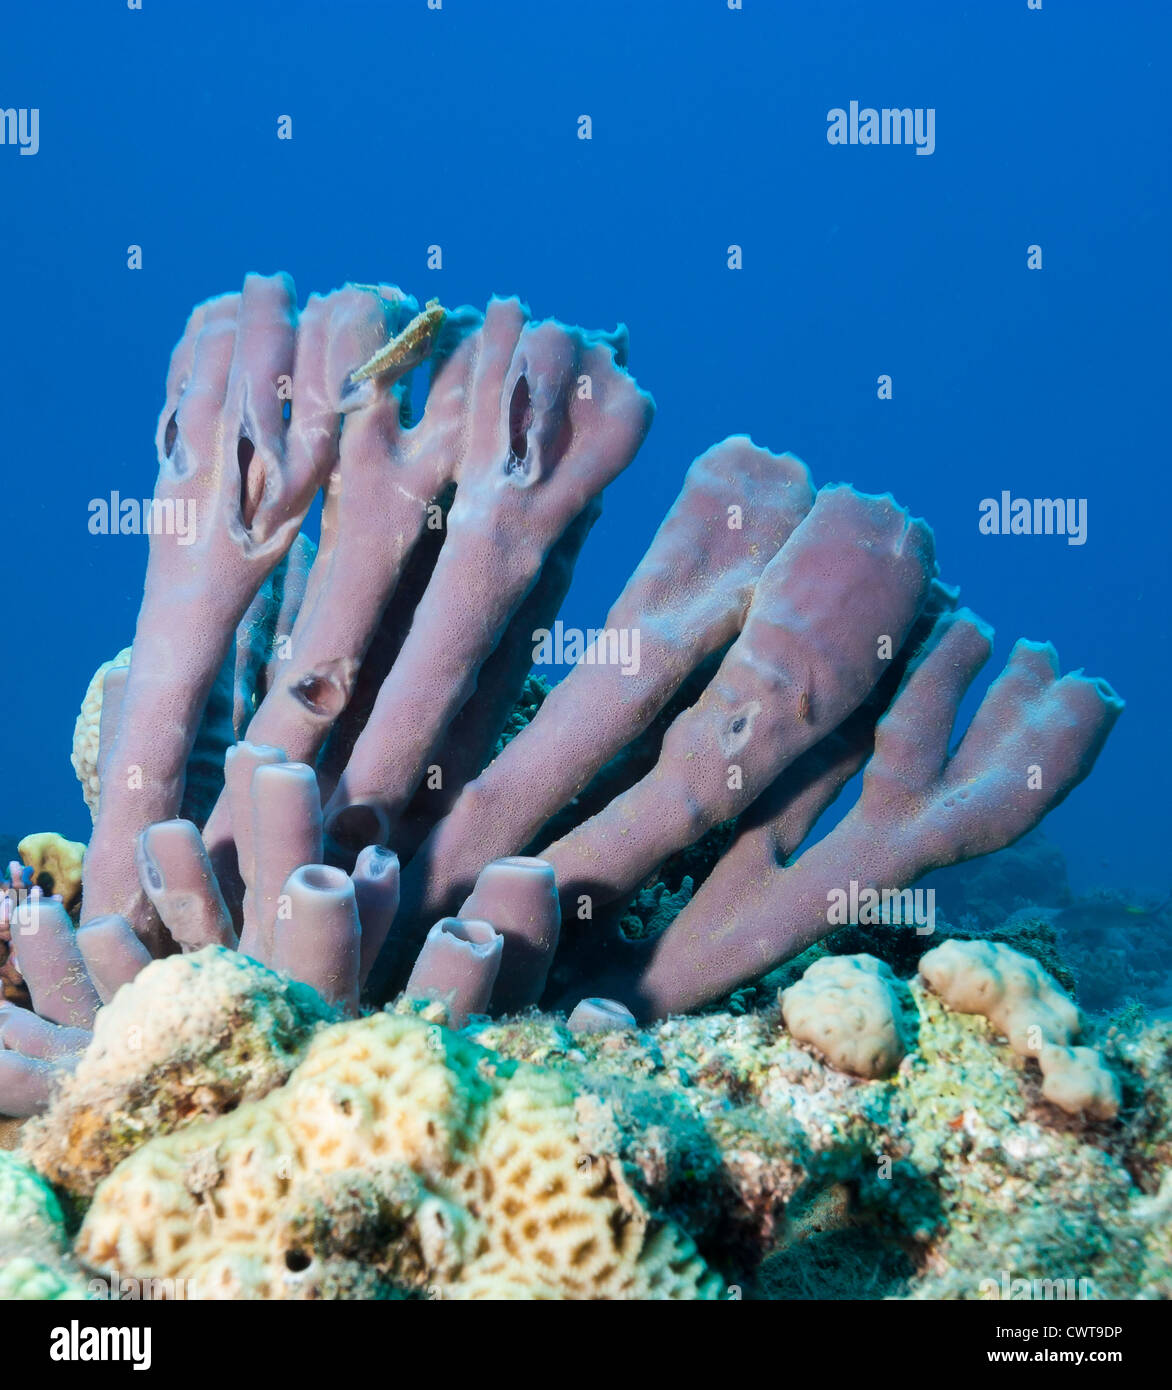 Colonial tube sponge on a tropical coral reef Stock Photo